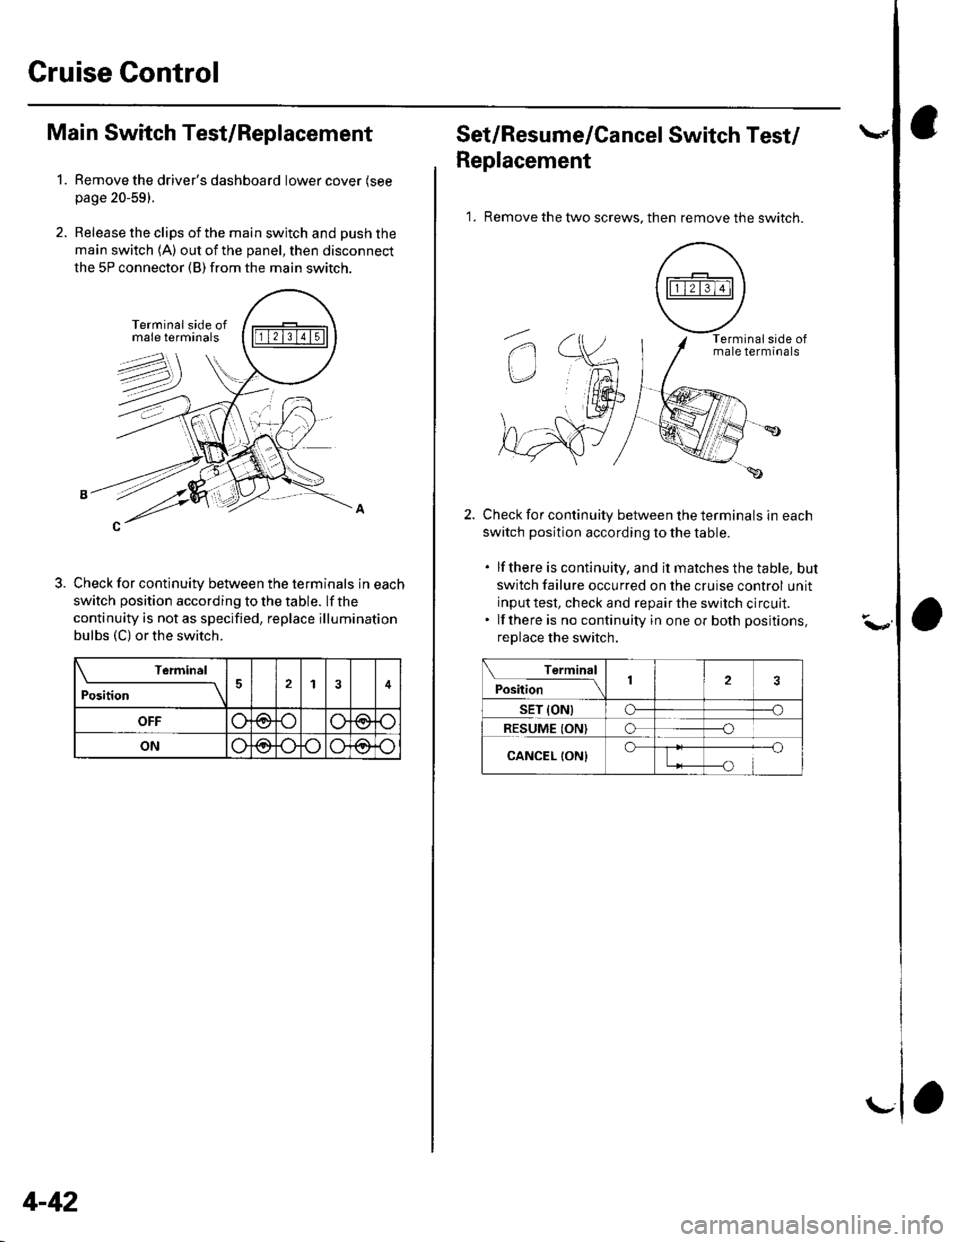 HONDA CIVIC 2003 7.G Workshop Manual Cruise Control
1.
Main Switch Test/Replacement
Remove the drivers dashboard lower cover (see
page 20-59).
Release the clips of the main switch and push the
main switch 1A) out of the panel, then disc